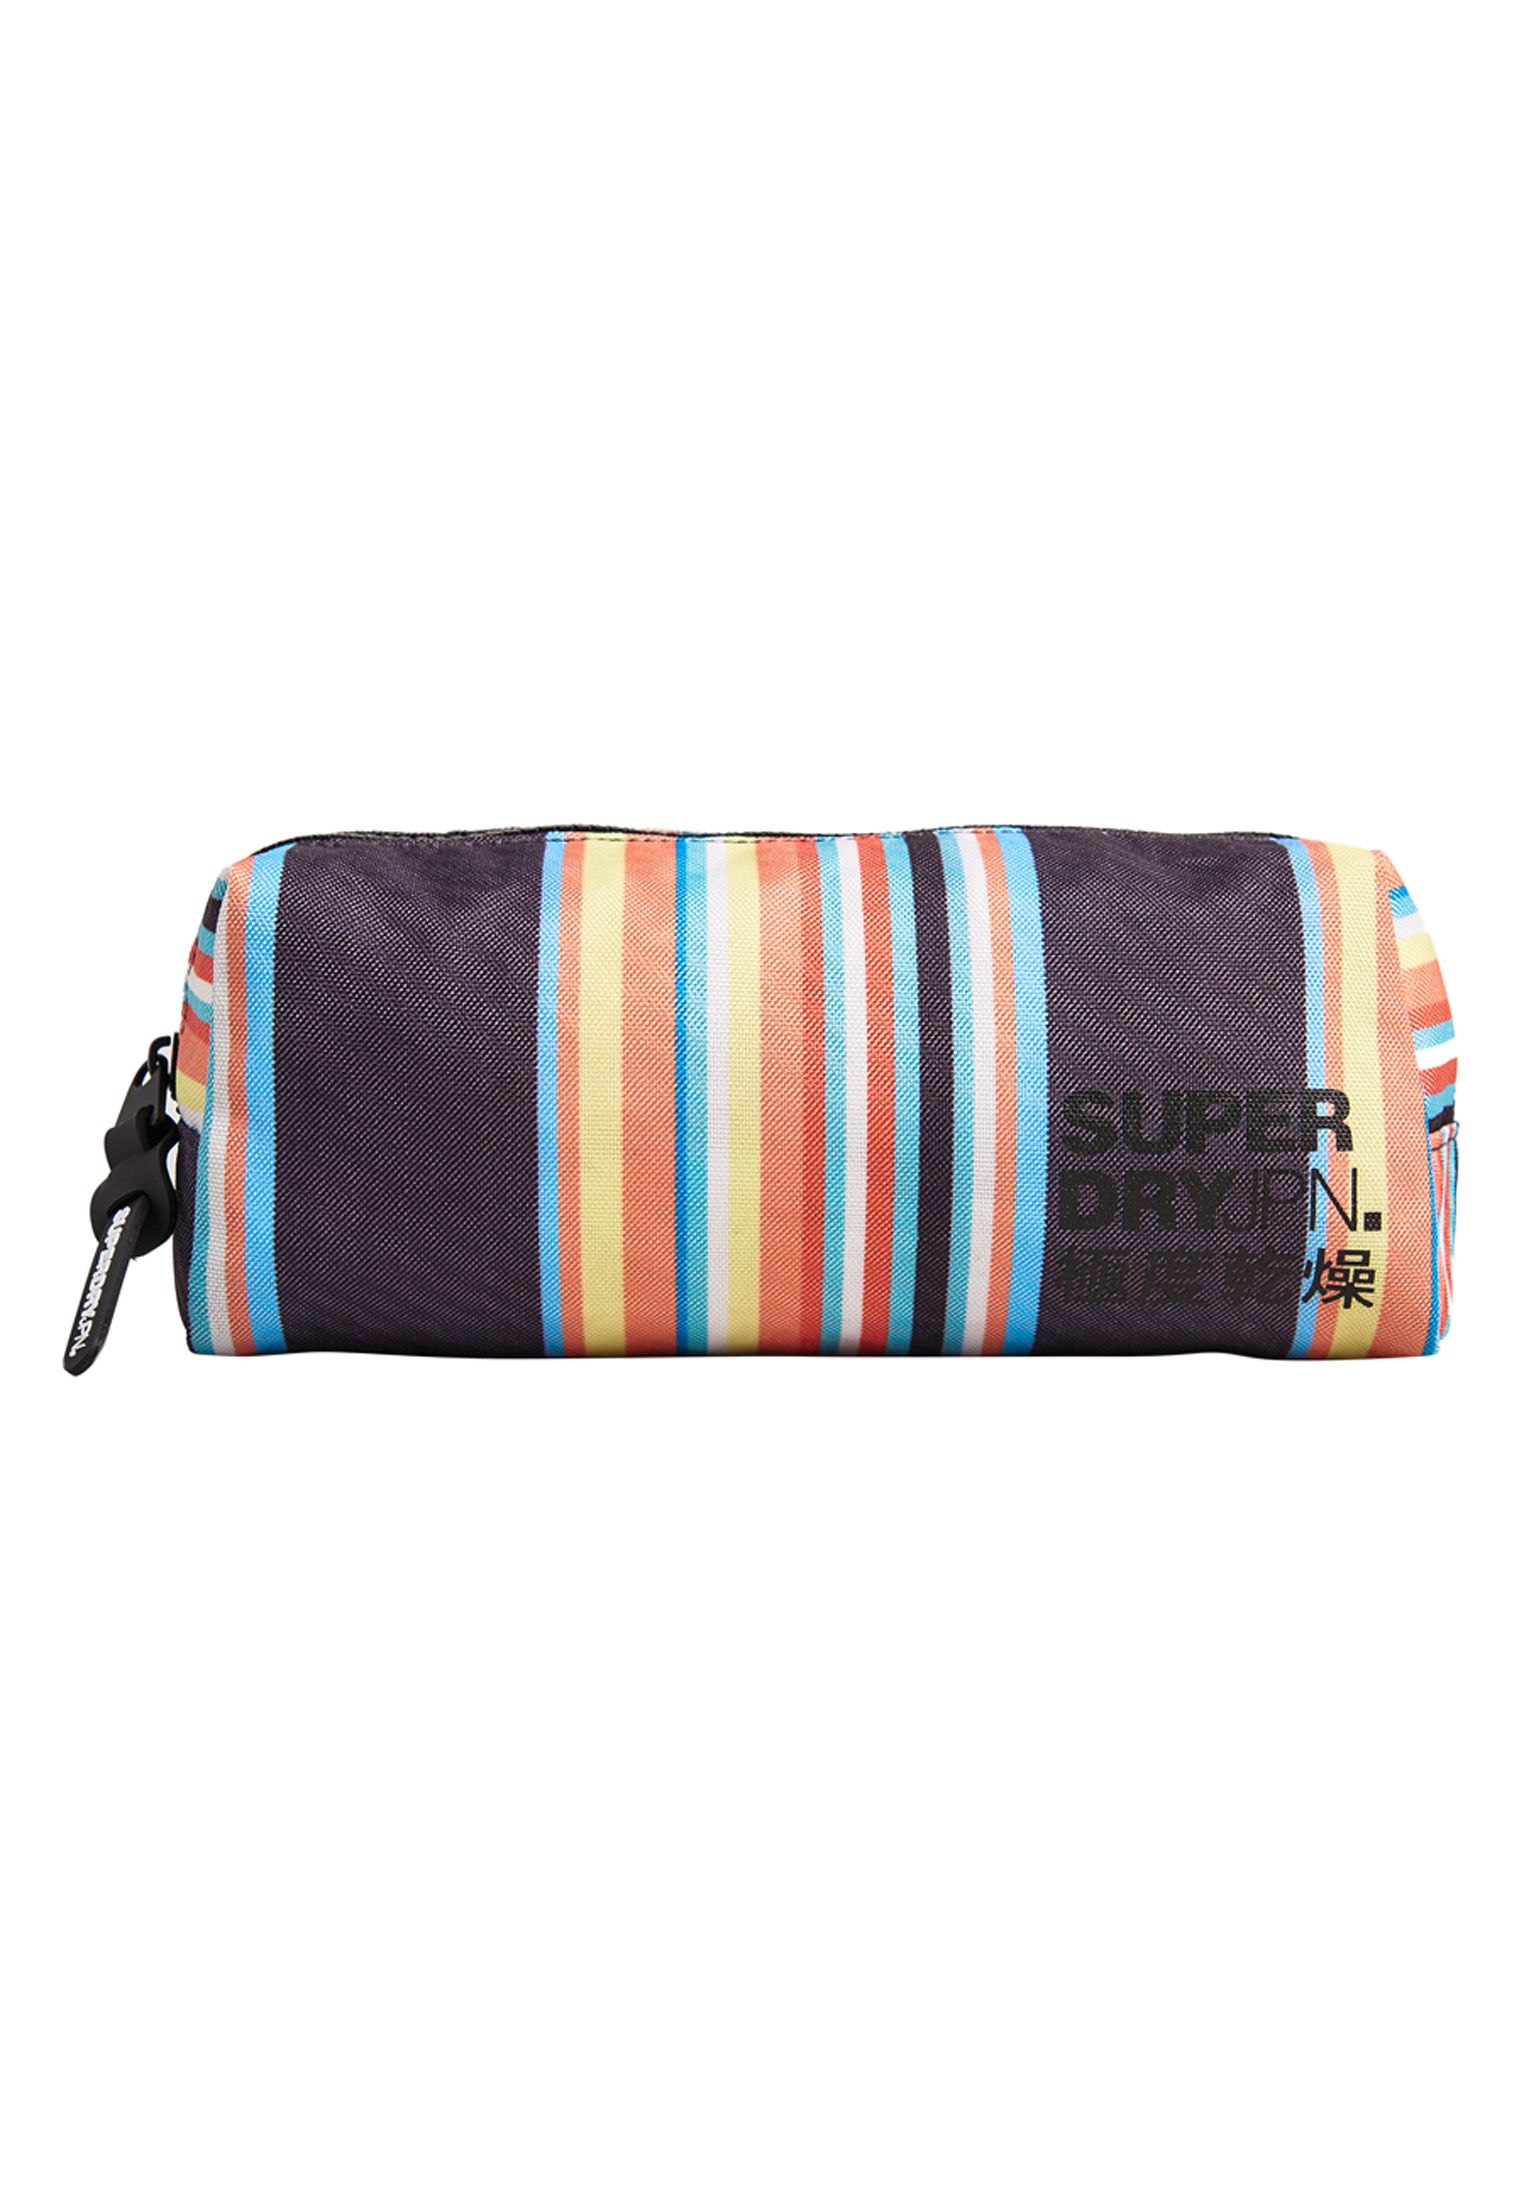 Superdry men's Classic pencil case. This classic pencil case features a zipped main compartment - plenty of room for storing all your stationery supplies. Completed with an iconic Superdry logo on the front and Superdry graphic on the zip pull.H 12cm x L 23cm x D 10cm